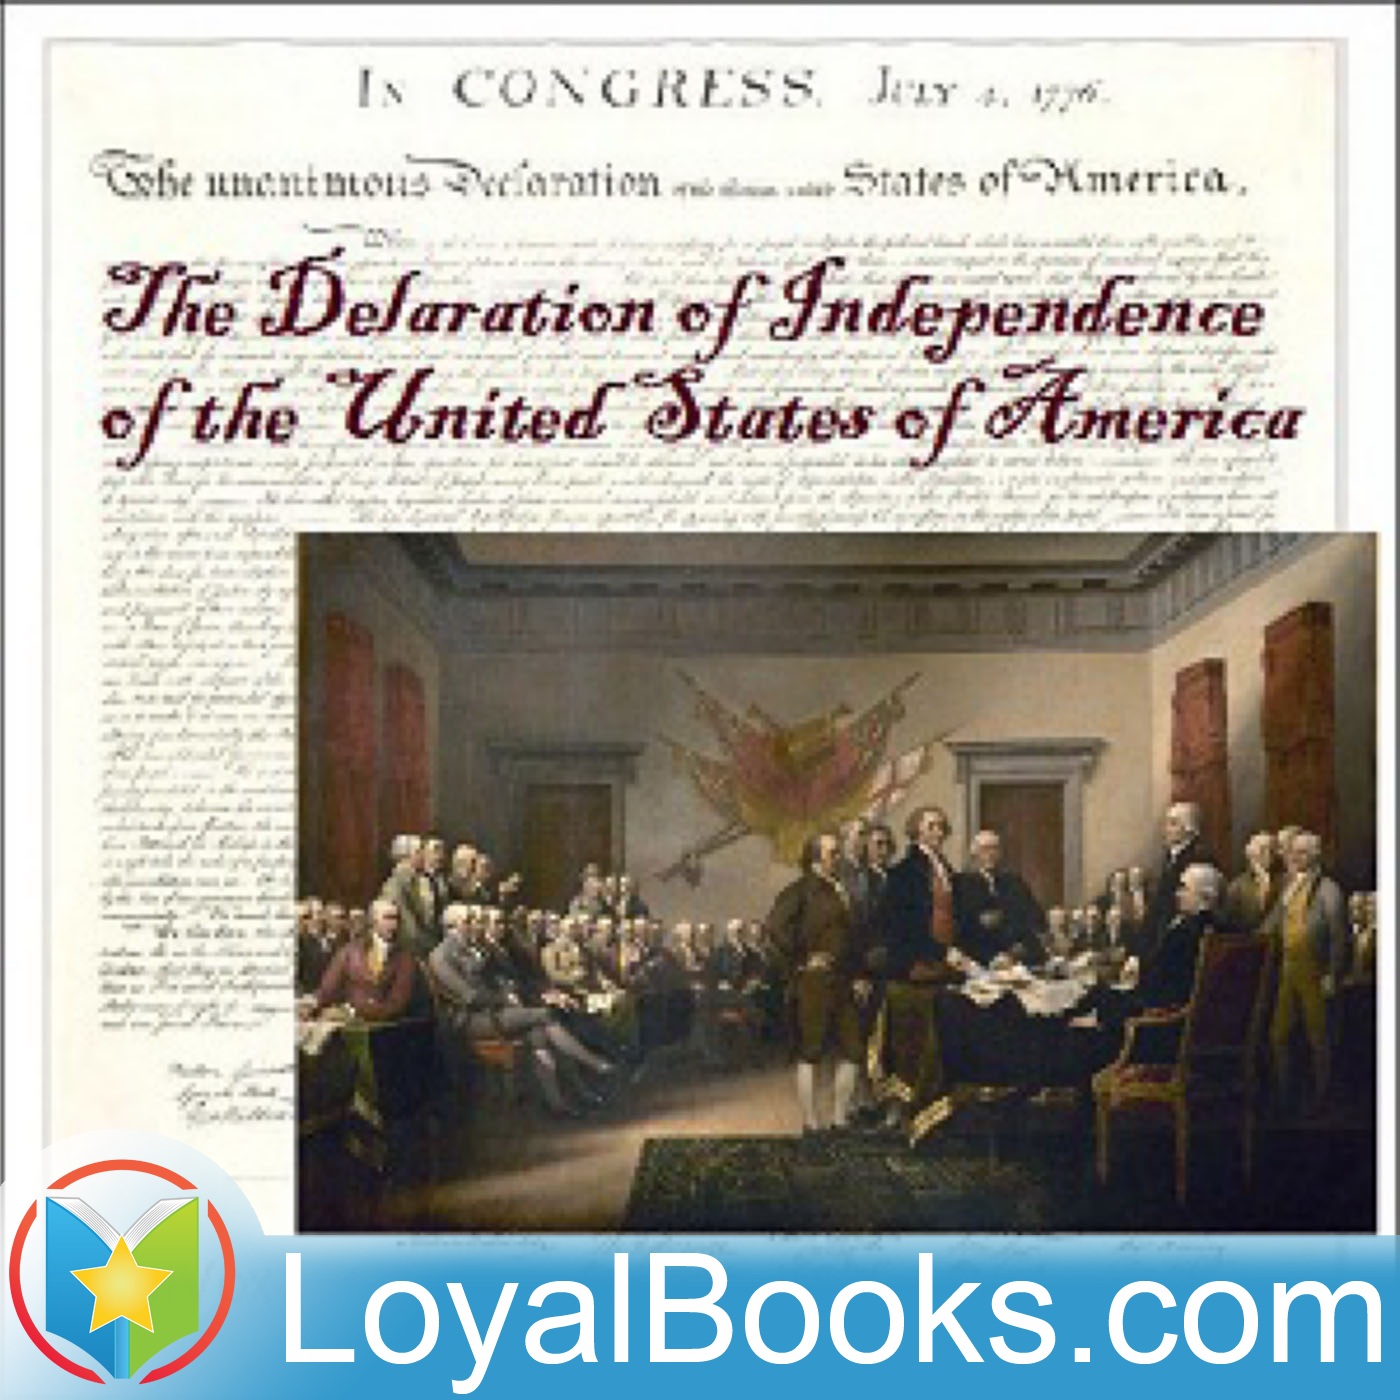 The Declaration of Independence of the United States of America by Founding Fathers of the United St...